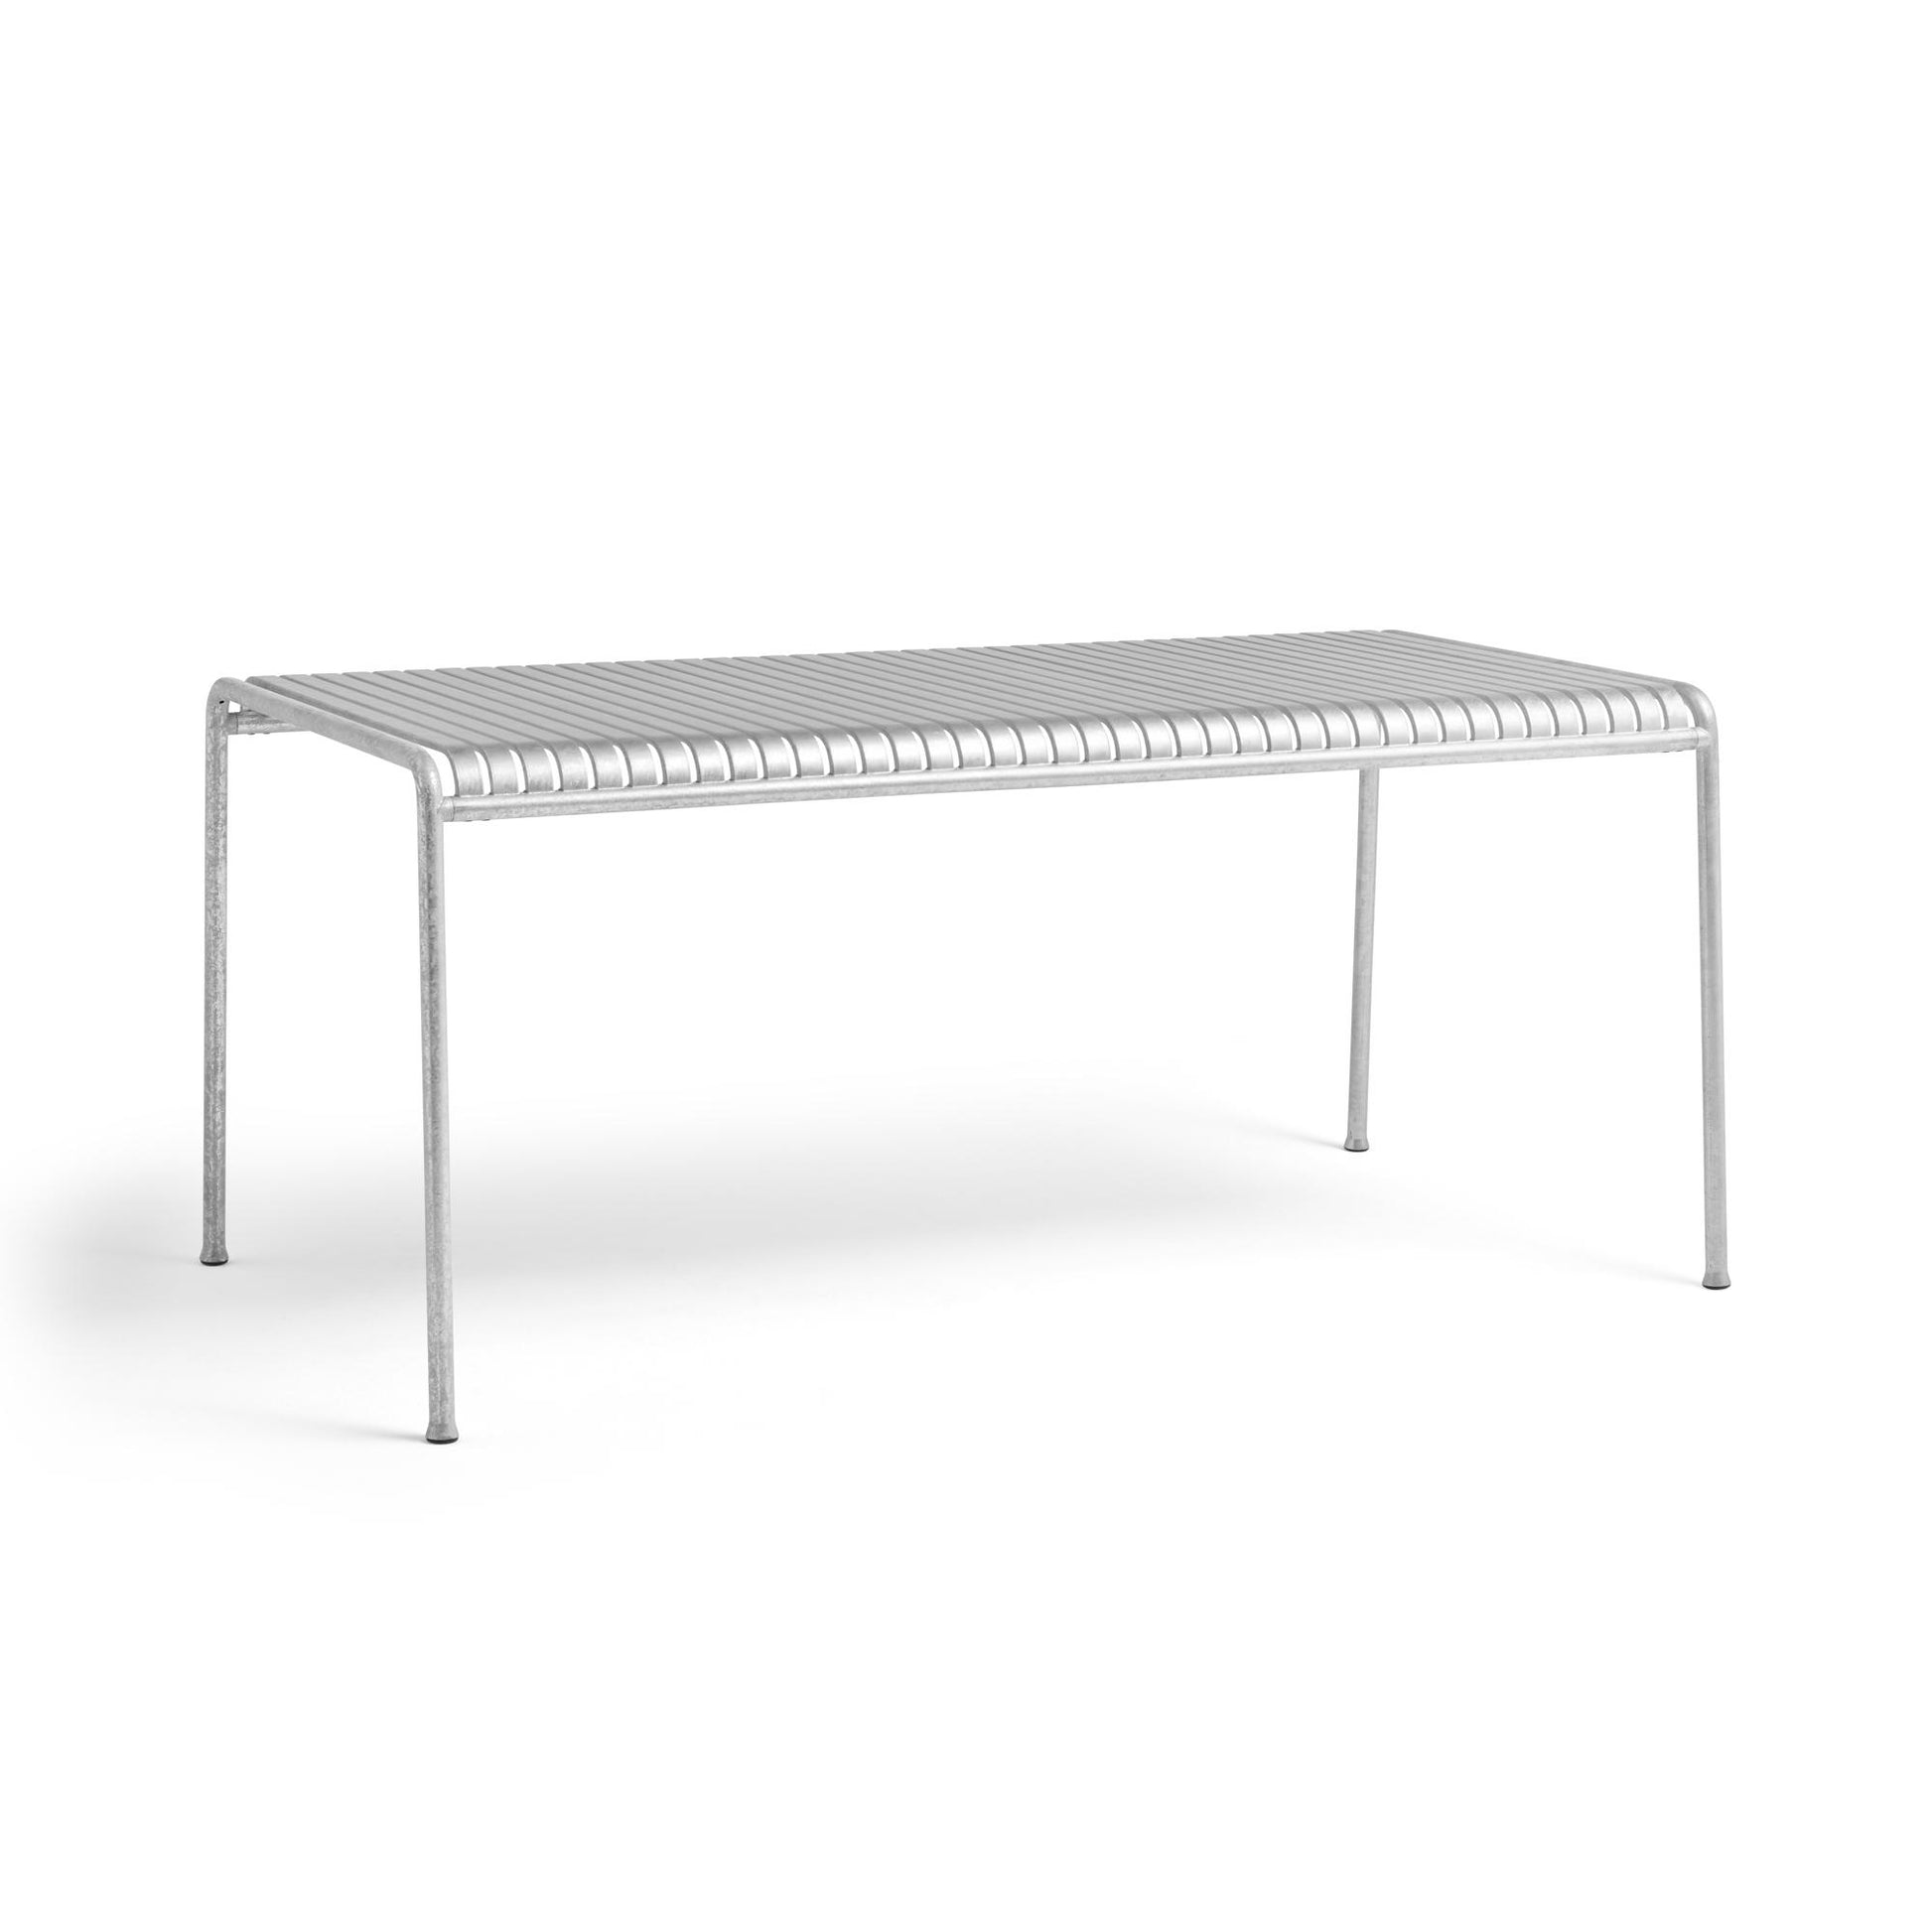 Palissade Table L170 by HAY #Hot-dip Galvanized Steel